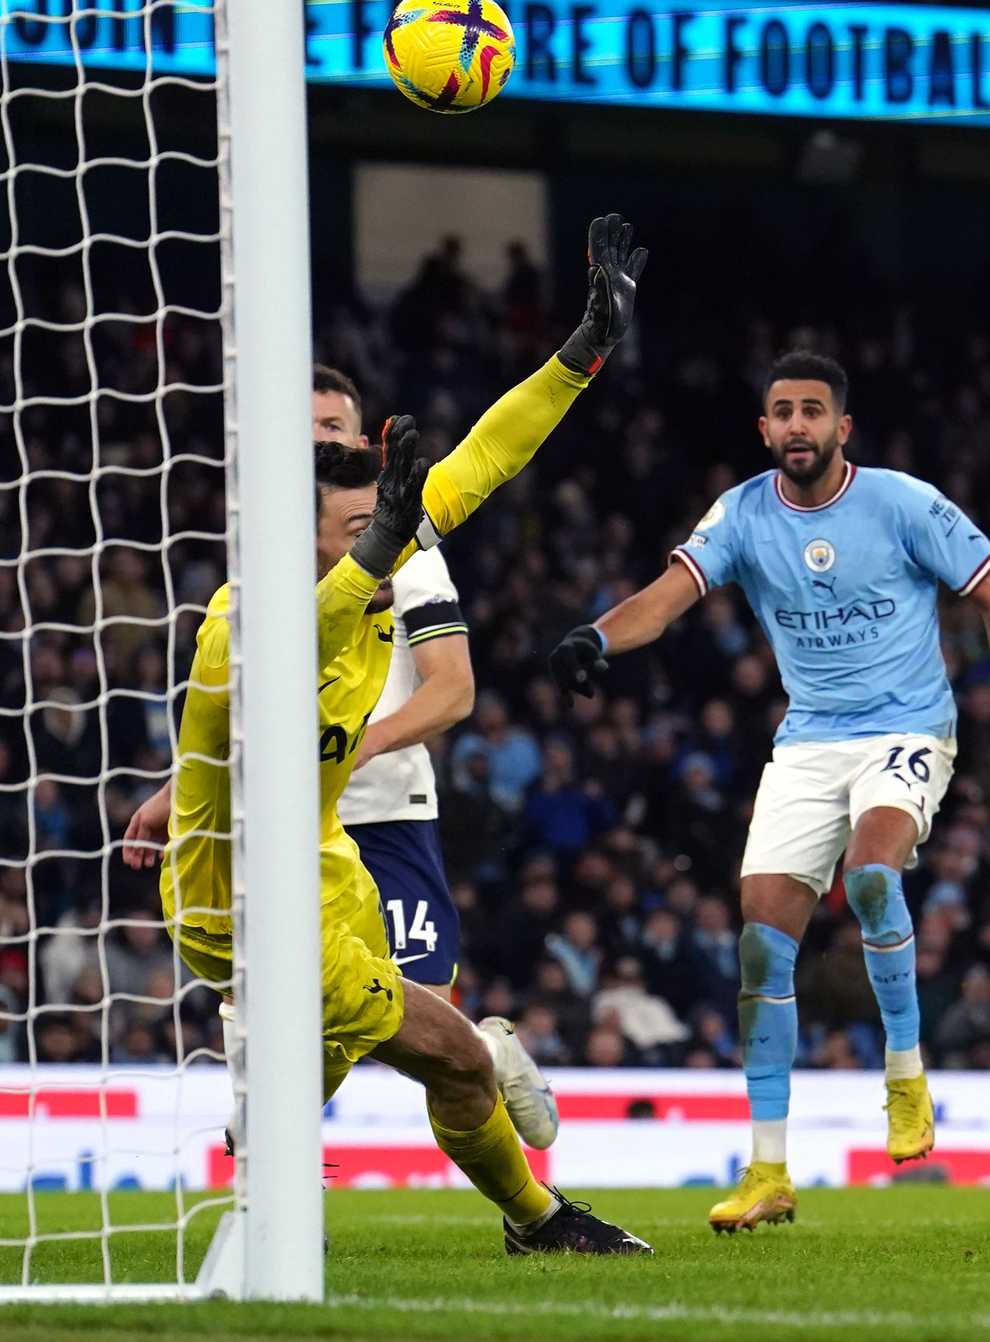 Tottenham conceded four goals in the second half to lose 4-2 at Manchester City (Martin Rickett/PA)